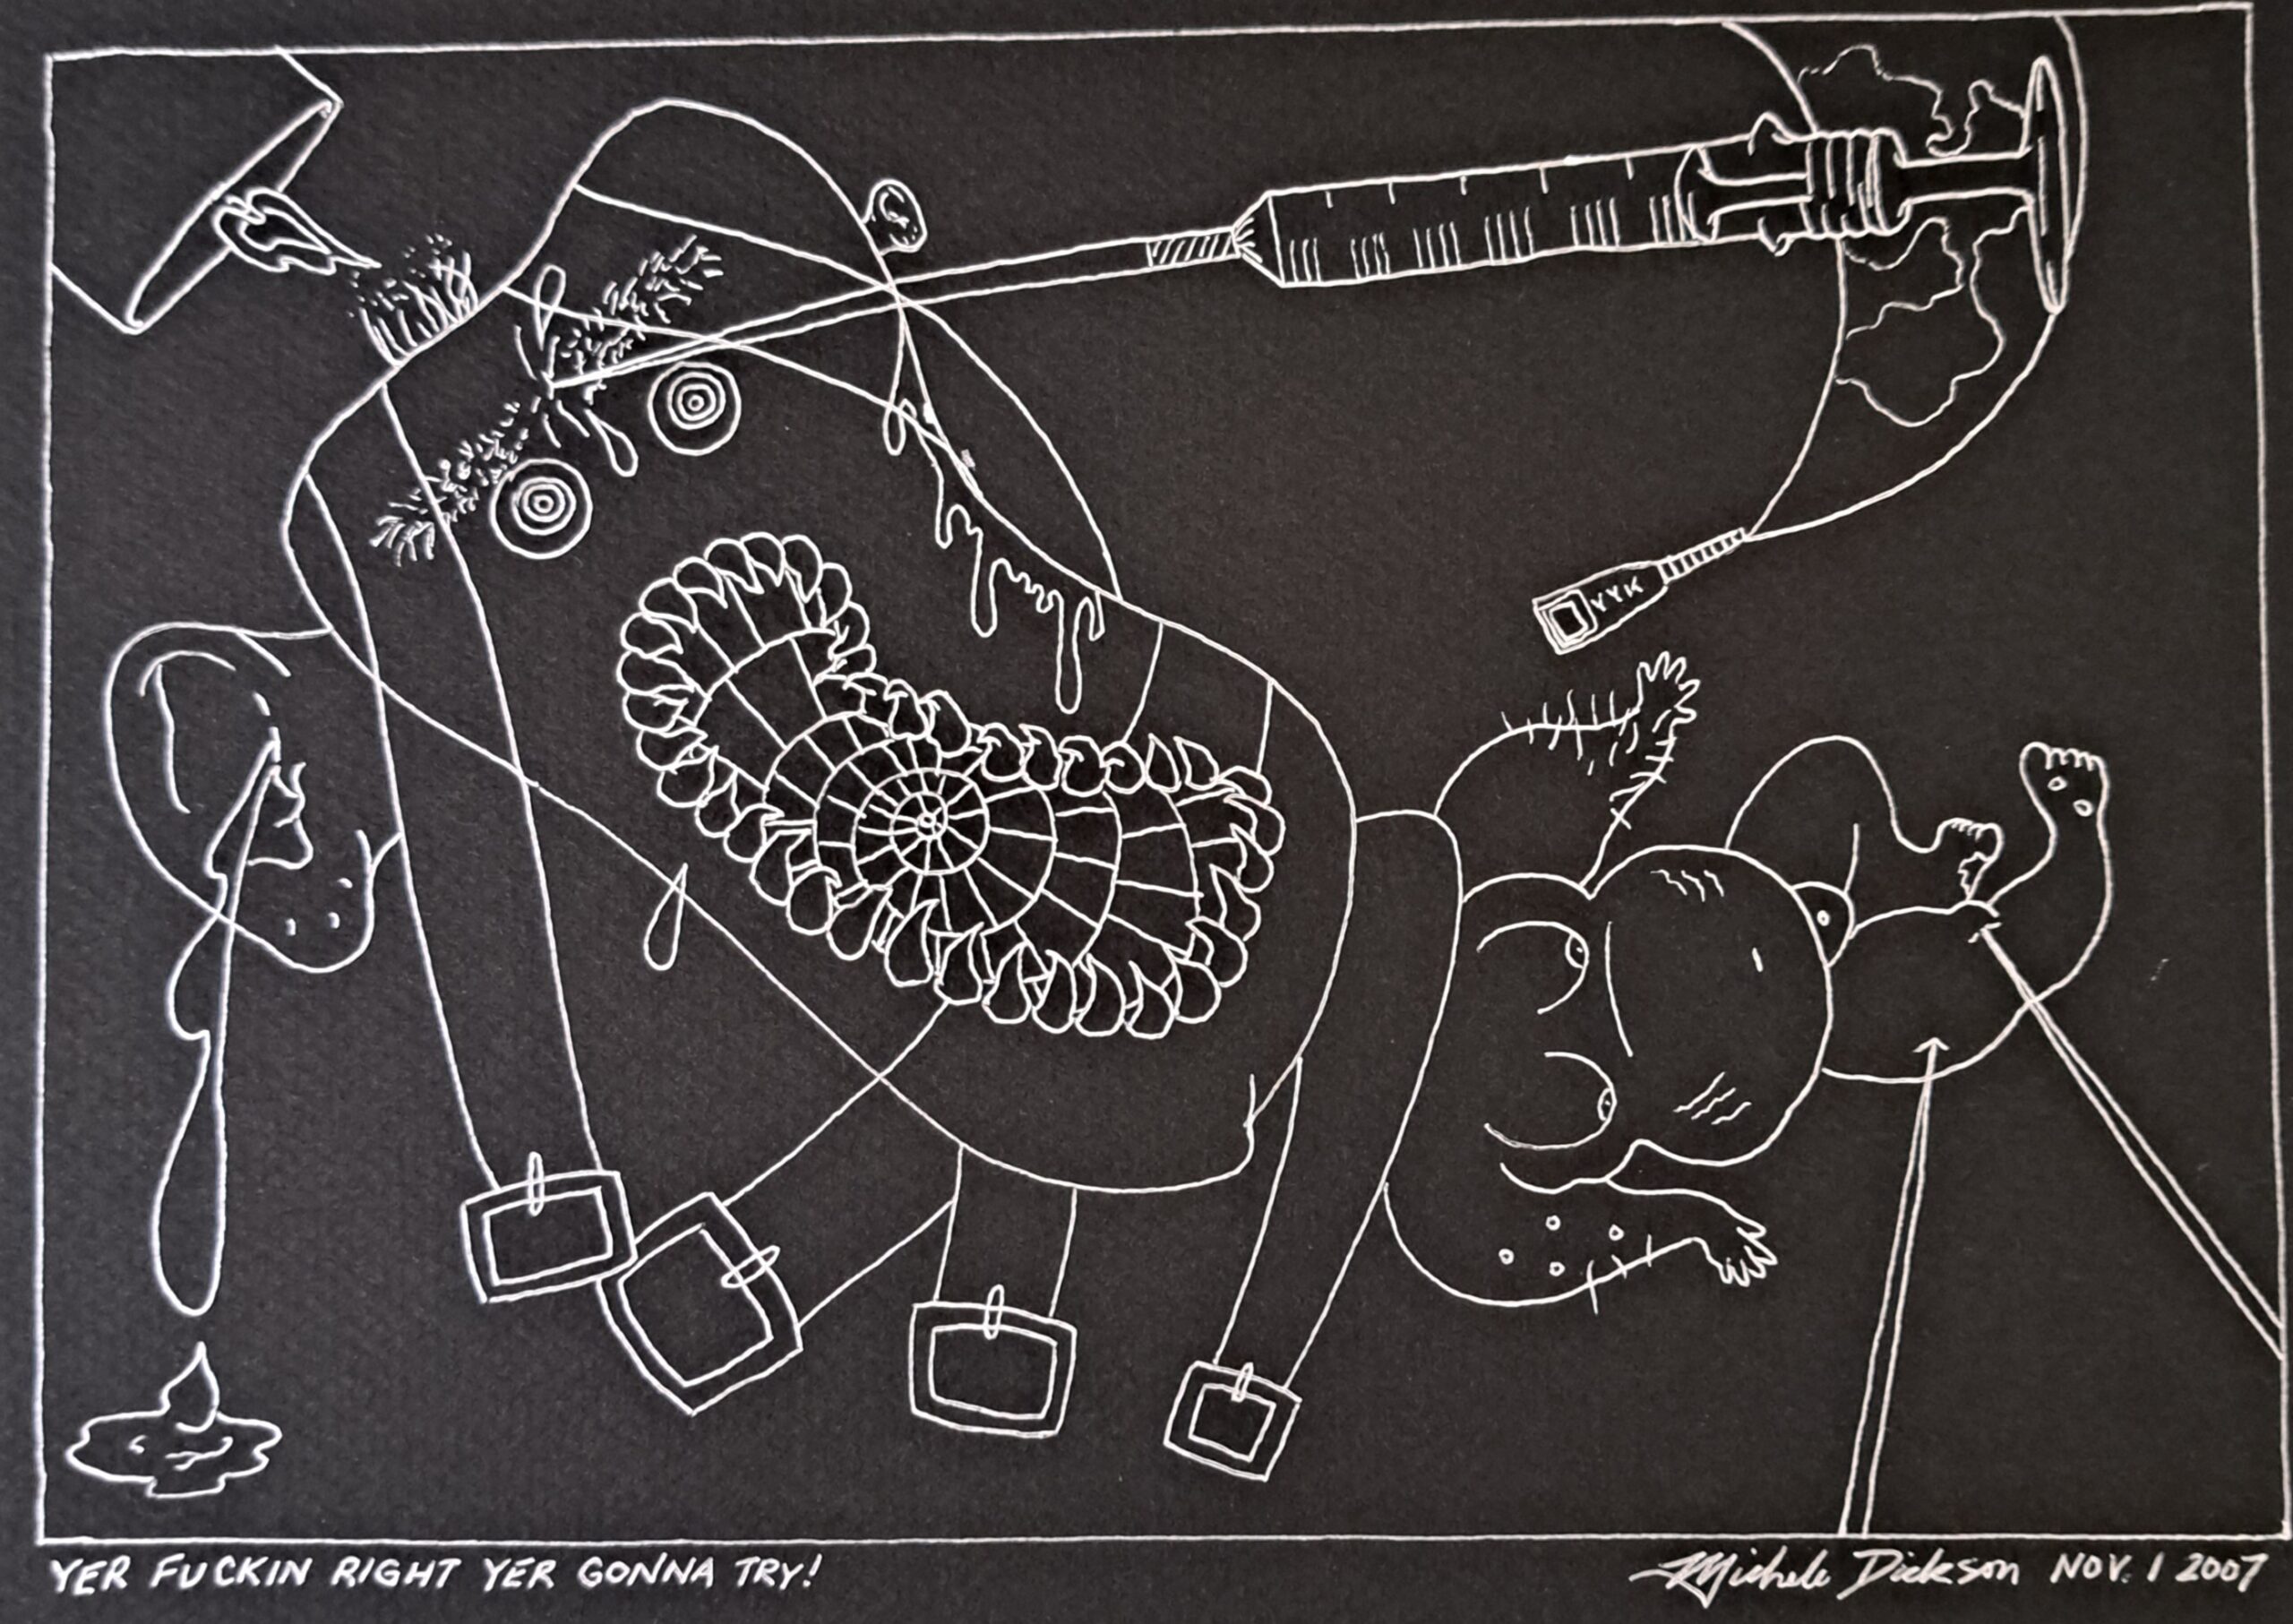 Drawing on black paper in white of an abstracted body and medical devices.